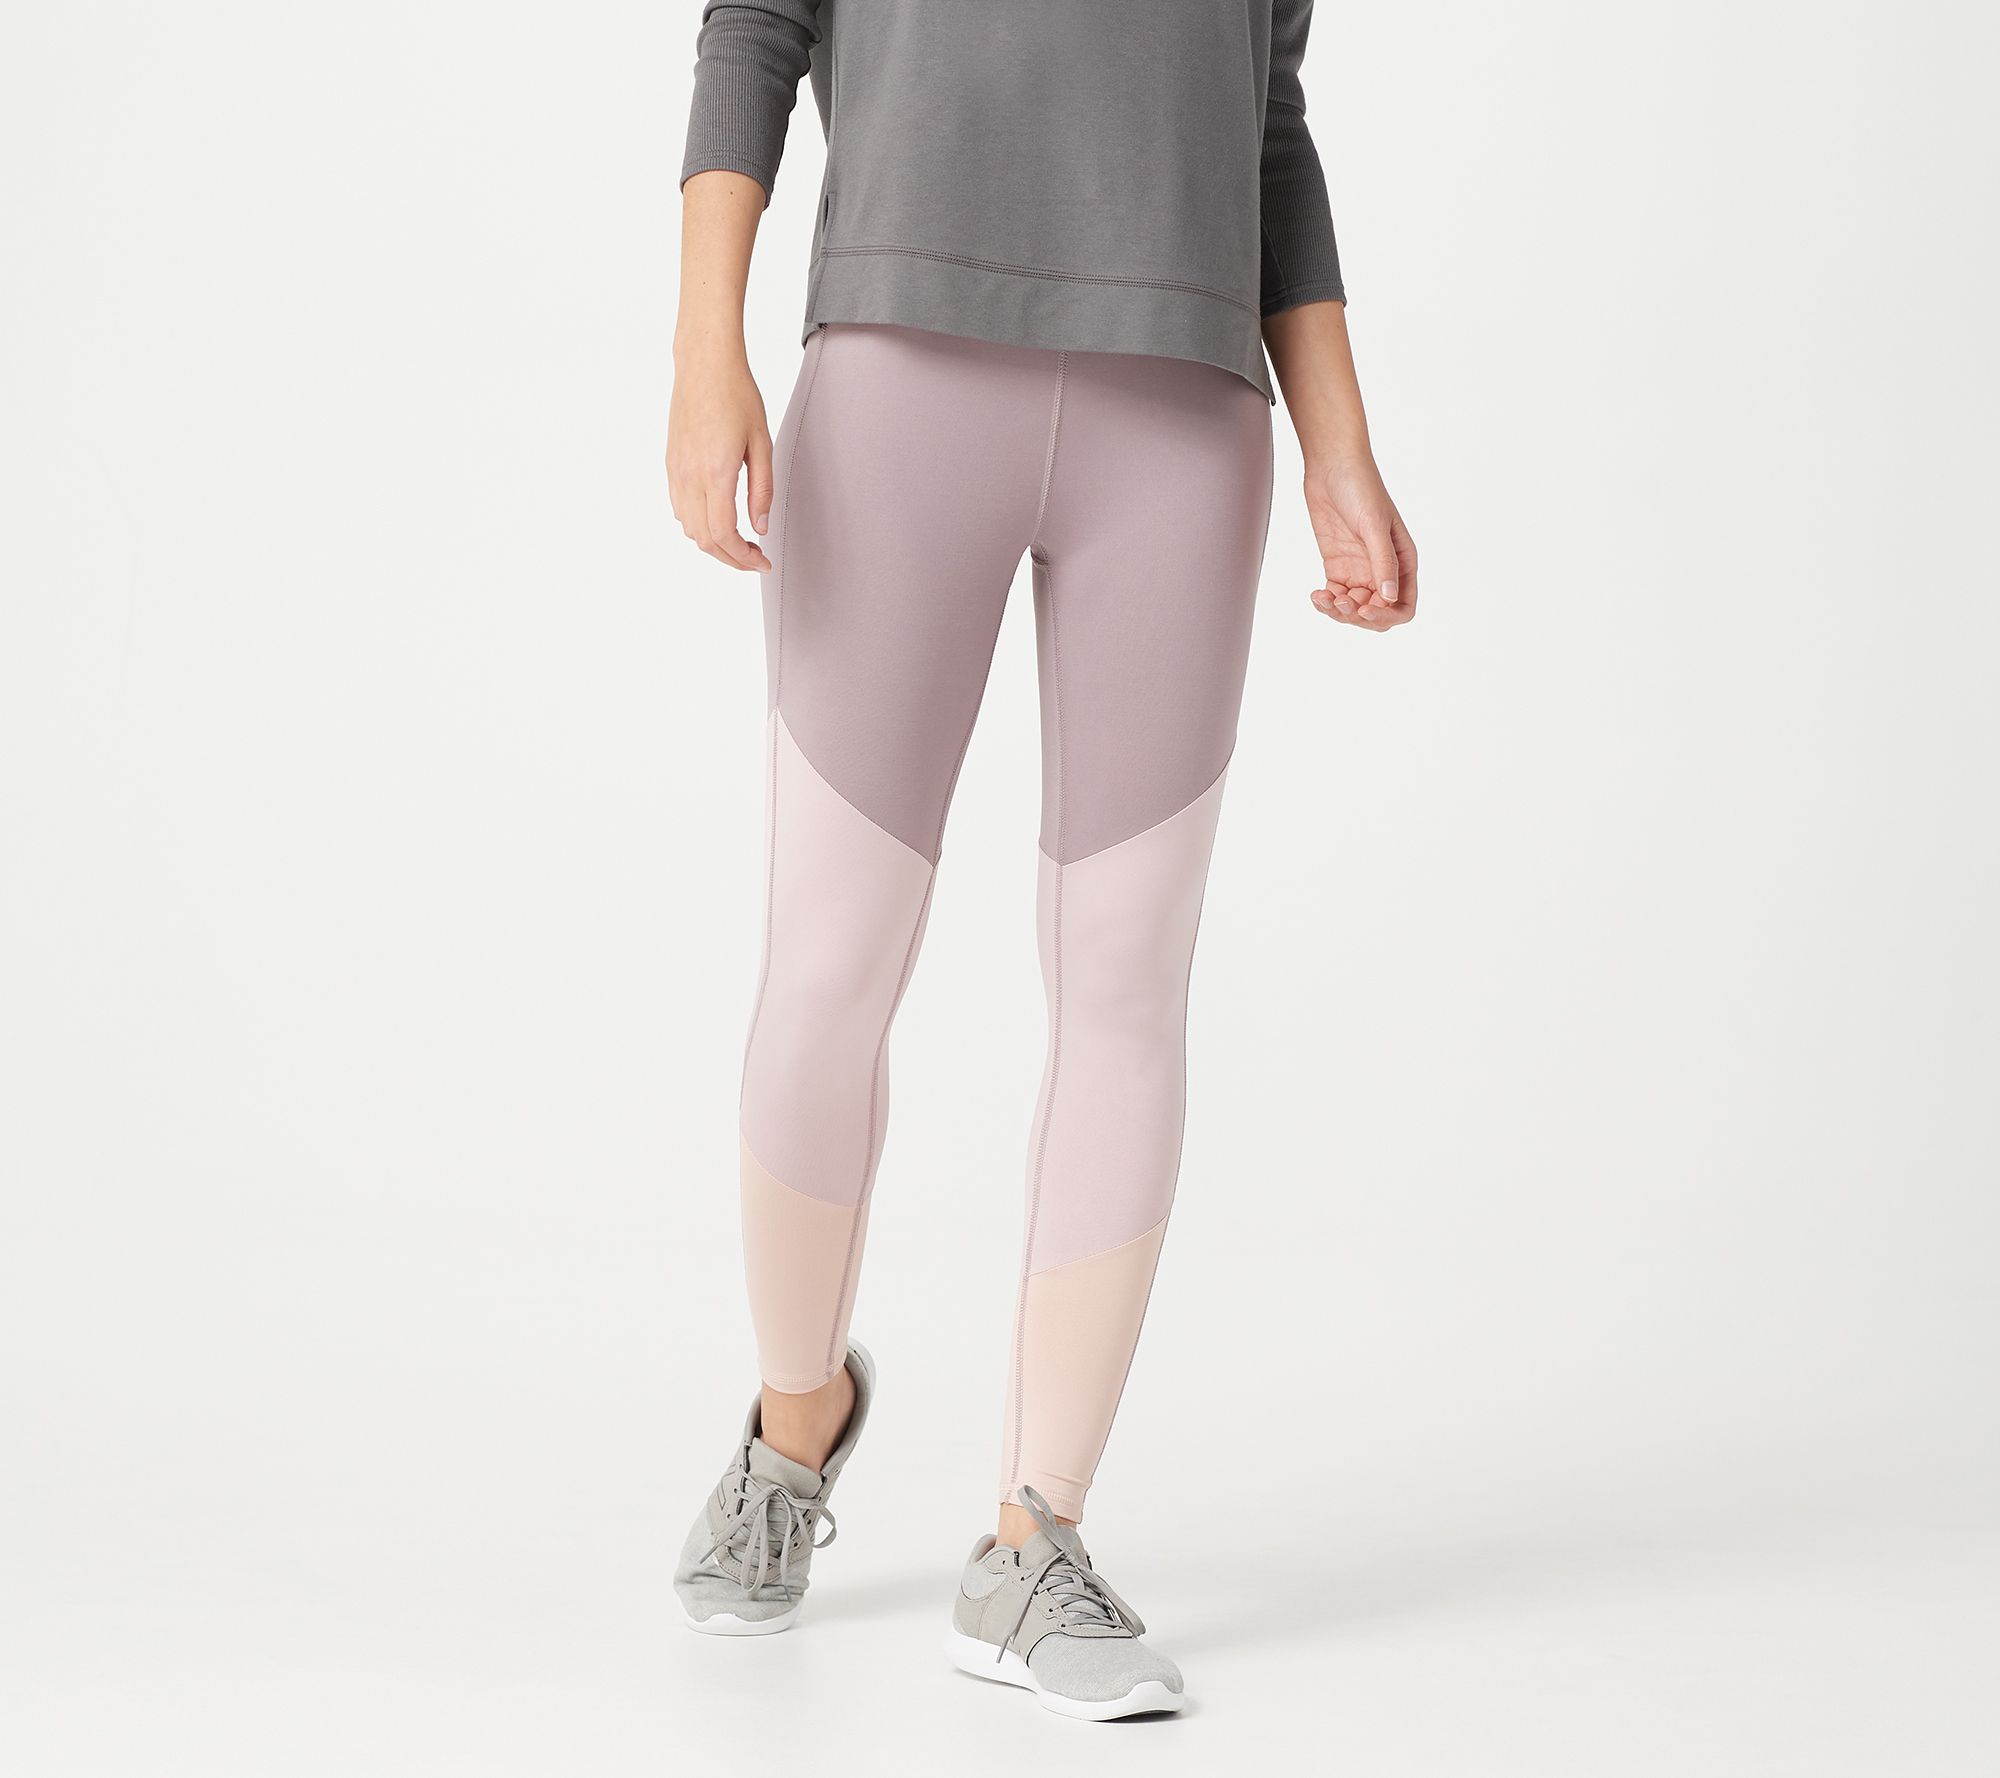 Tracy Anderson for G.I.L.I Petite Color-Blocked Leggings 